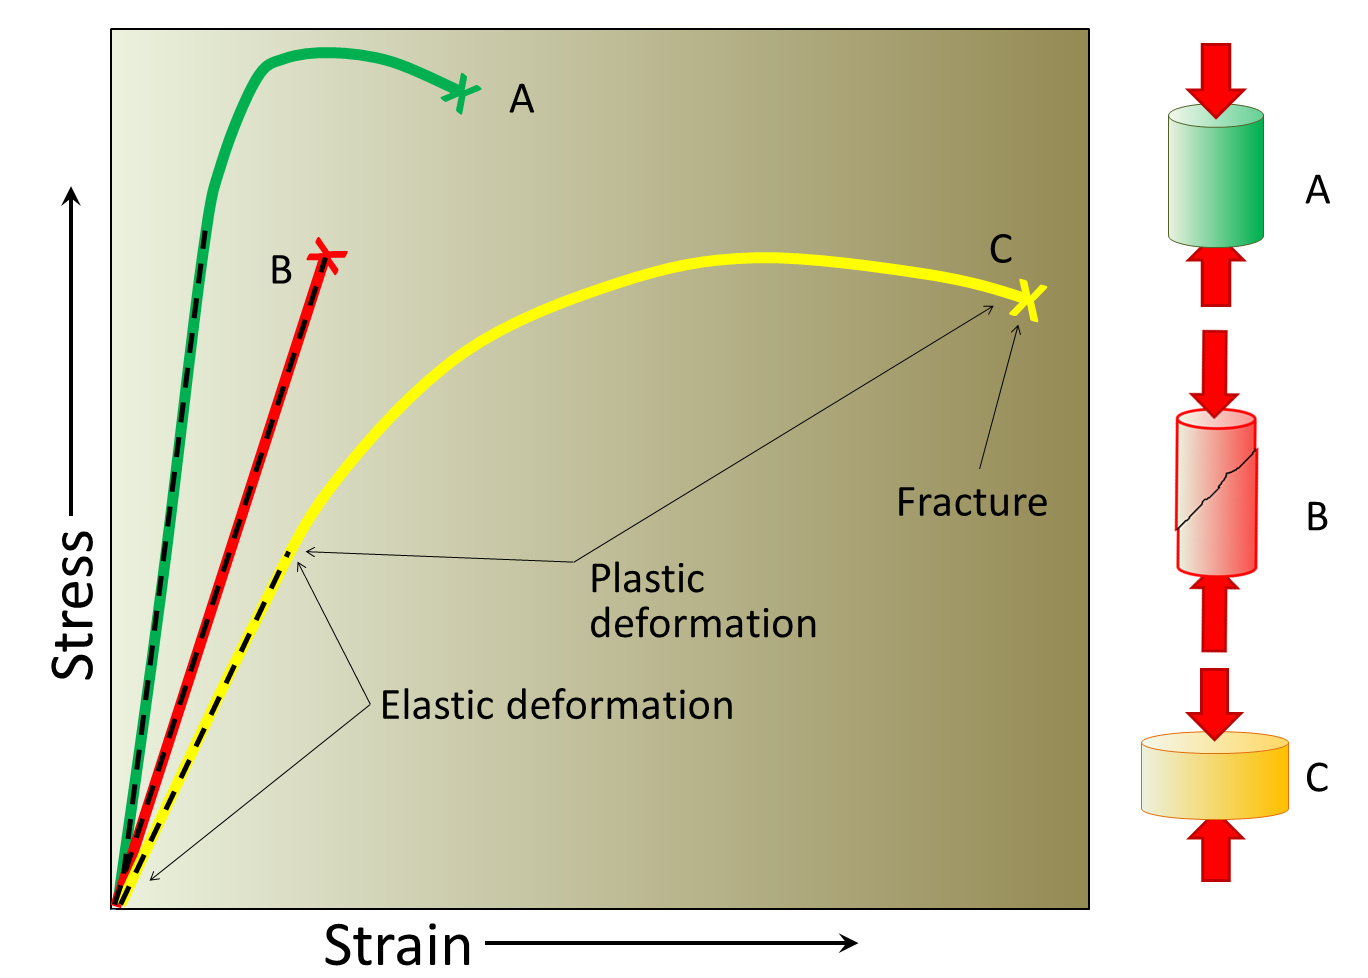 Figure 12.3 The varying types of response of geological materials to stress.  The straight dashed parts are elastic strain and the curved parts are plastic strain.  In each case the X marks where the material fractured.  A, the strongest material deforms relatively little and breaks at a high stress level.  B, strong but brittle, shows no plastic deformation and breaks after relatively little elastic deformation.  C, the most deformable, only breaks after significant elastic and plastic strain.  The three deformation diagrams on the right show A and C before breaking and B after breaking. [SE]